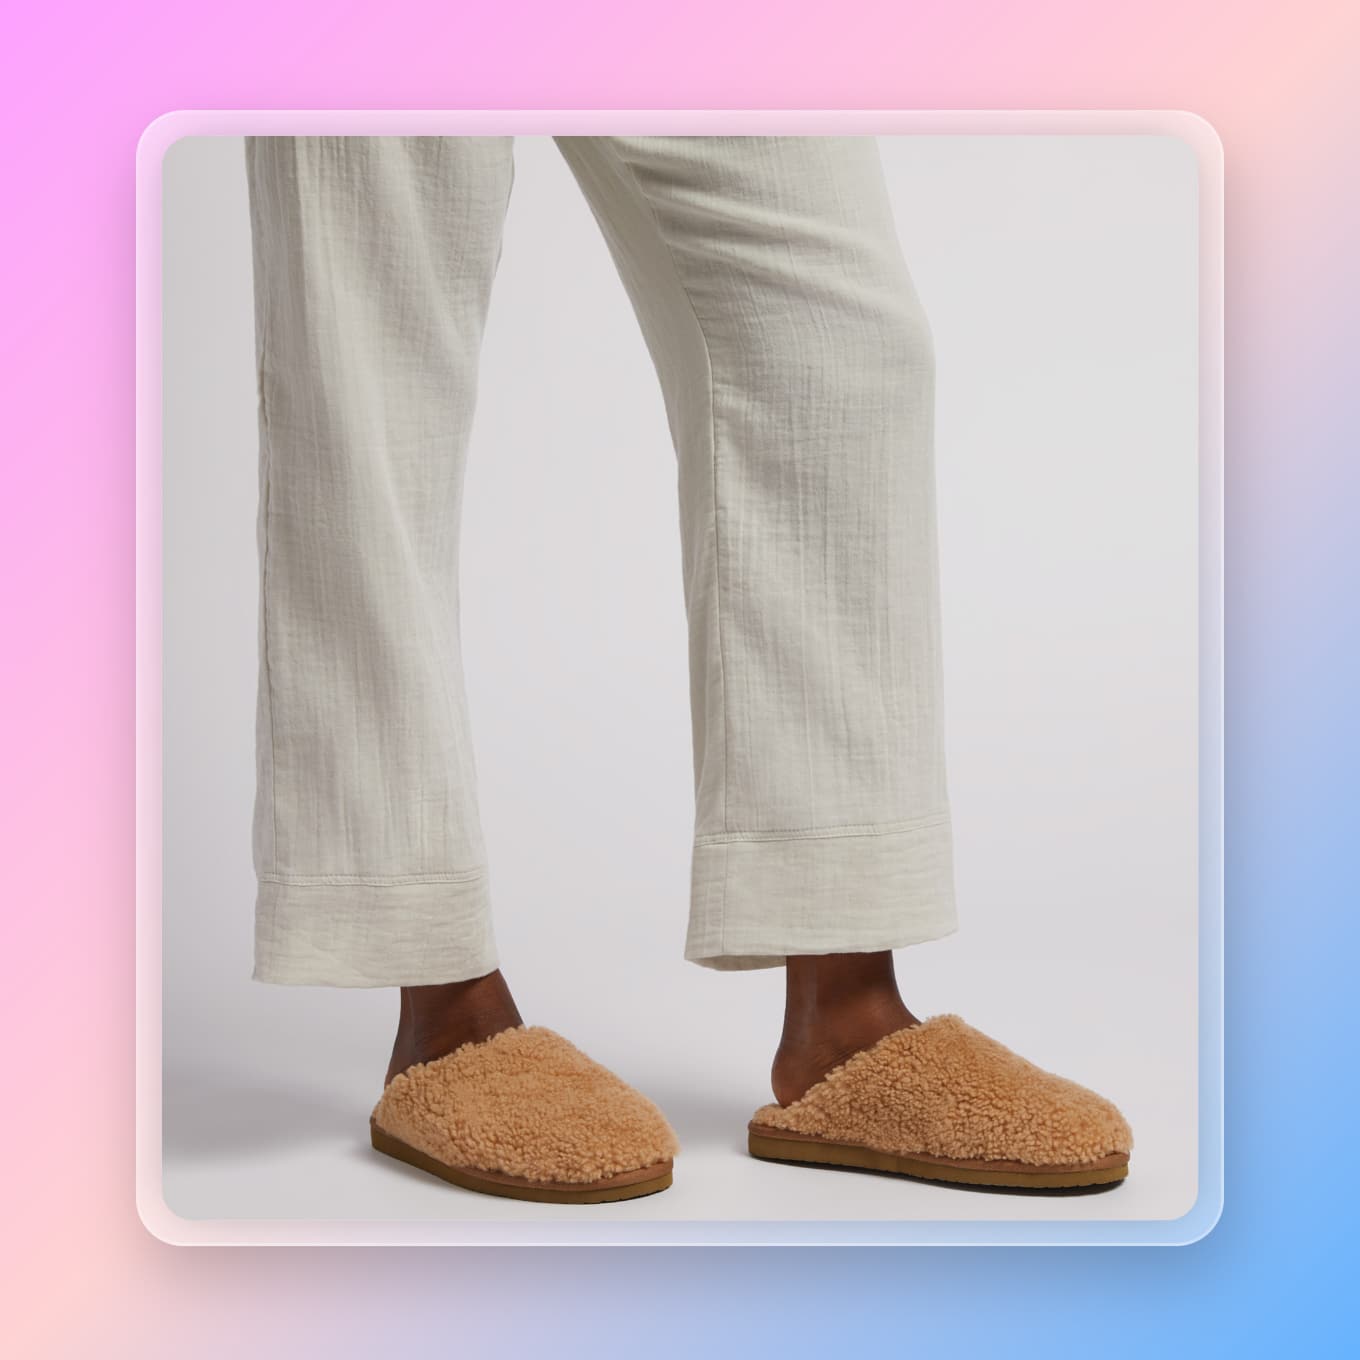 A person wearing white linen pants and fuzzy brown slippers